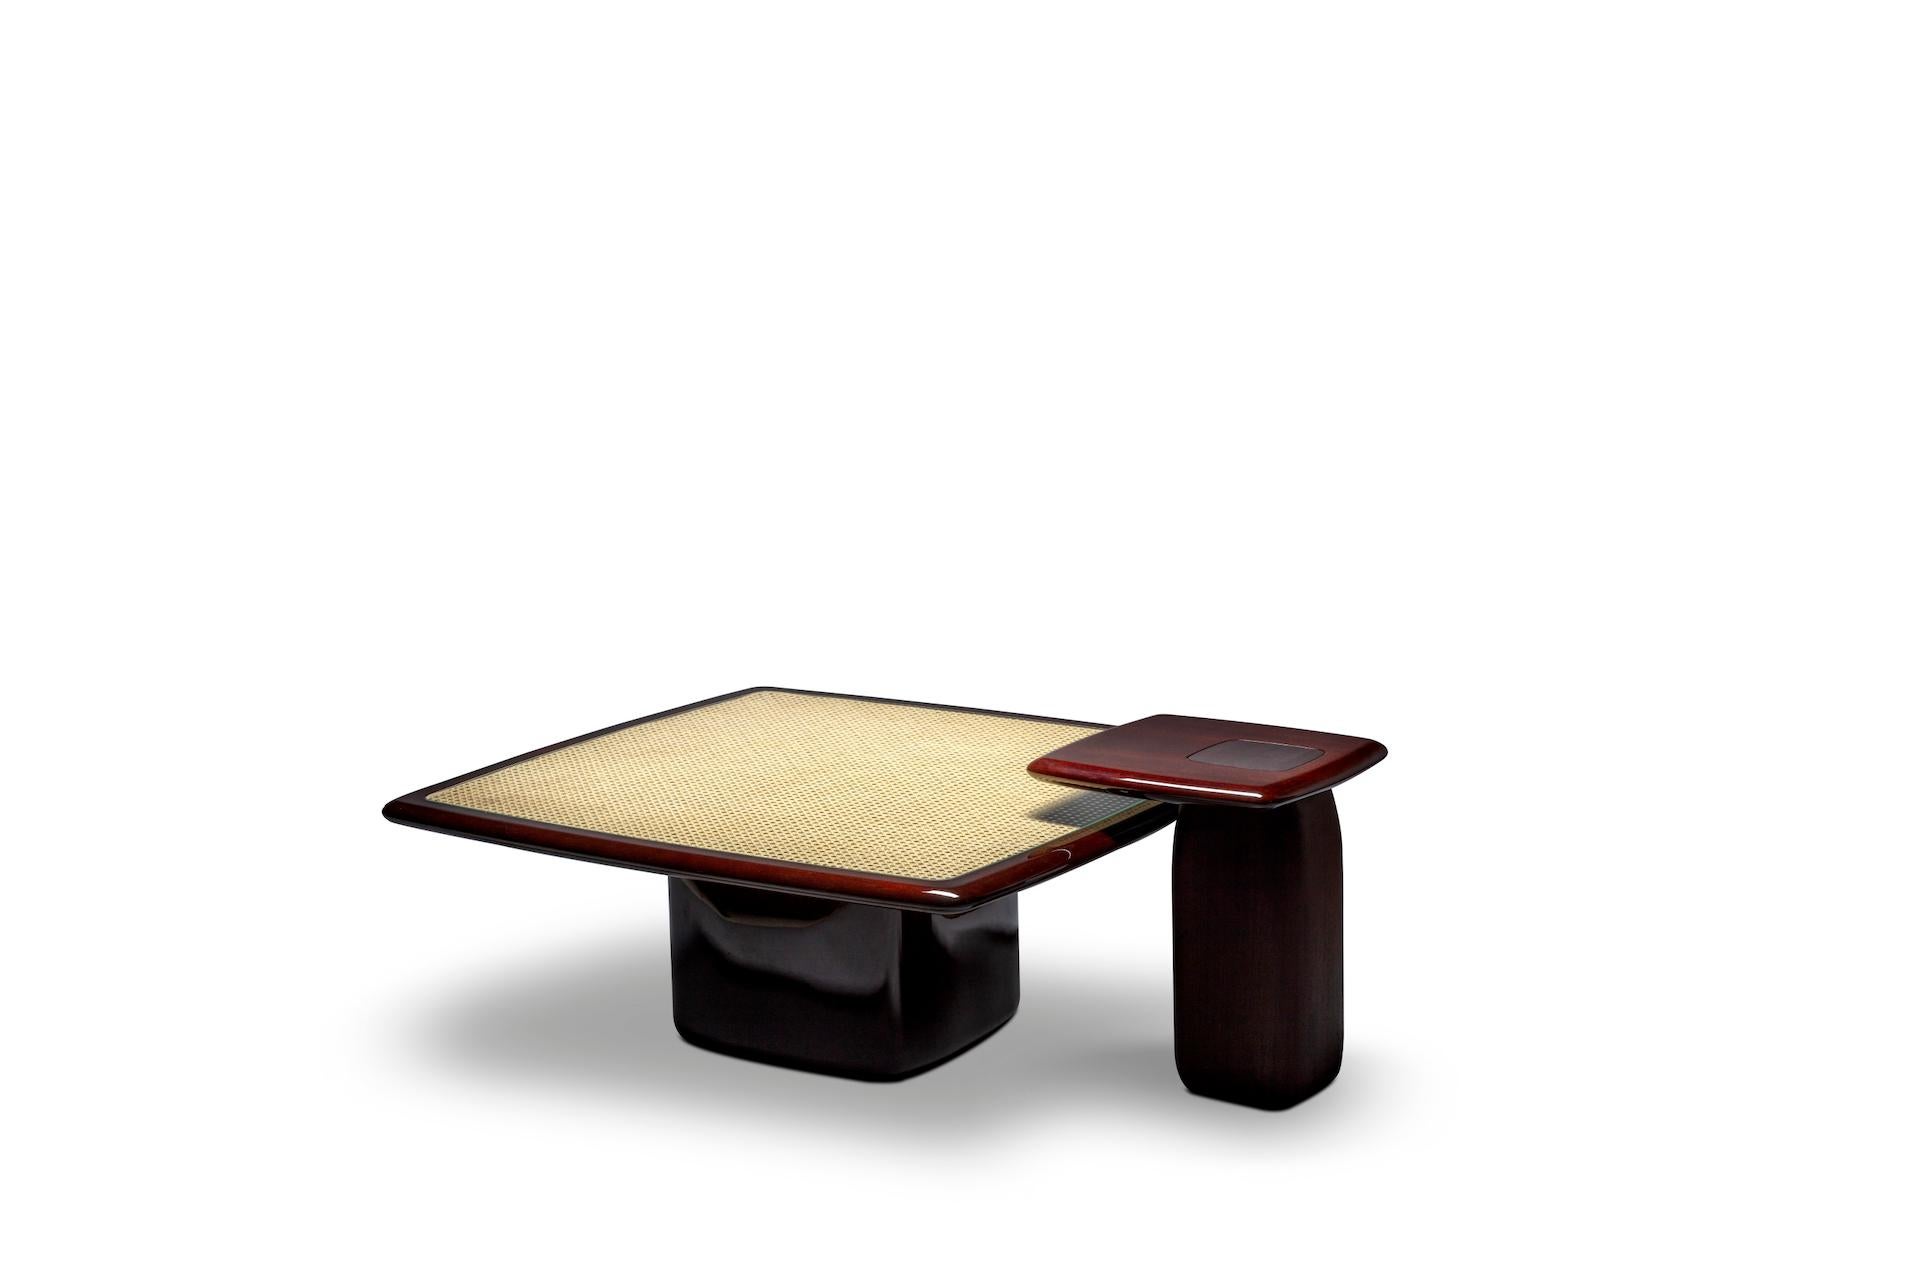 A composition that includes a set of one coffee tables and one side table. The square coffee table features a high gloss mahogany solid wood combined with natural cane and glass at the top.

The side table features a high gloss mahogany solid wood